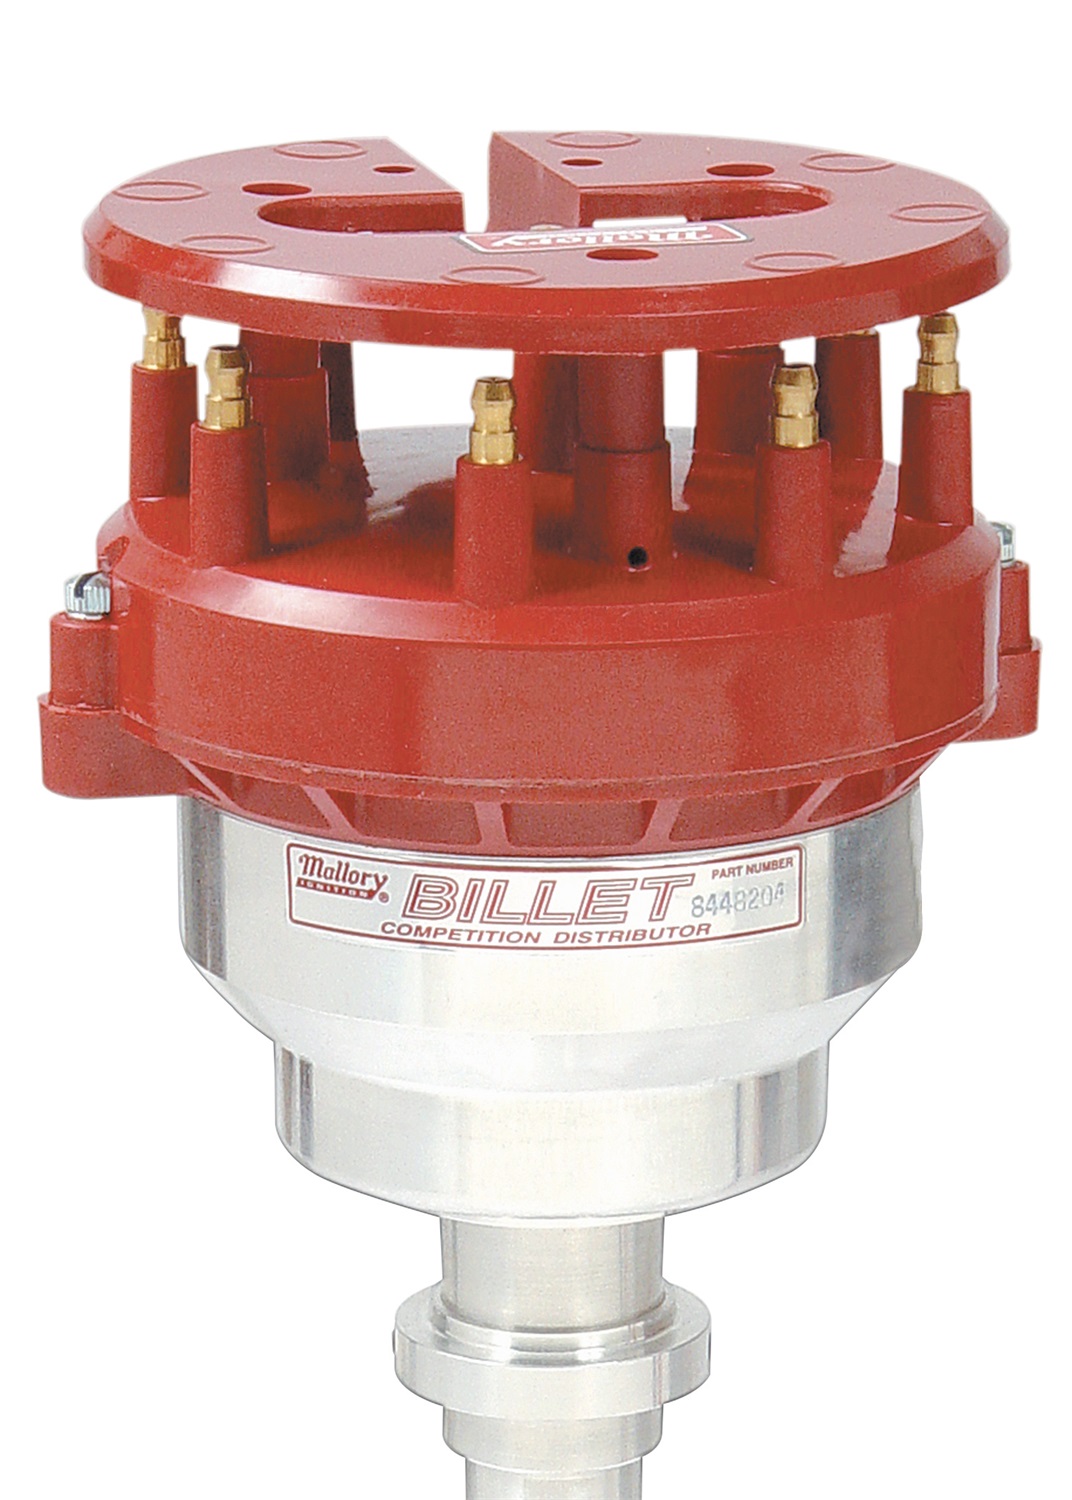 Mallory Mallory 8479004 84 Series; Billet Competition Distributor